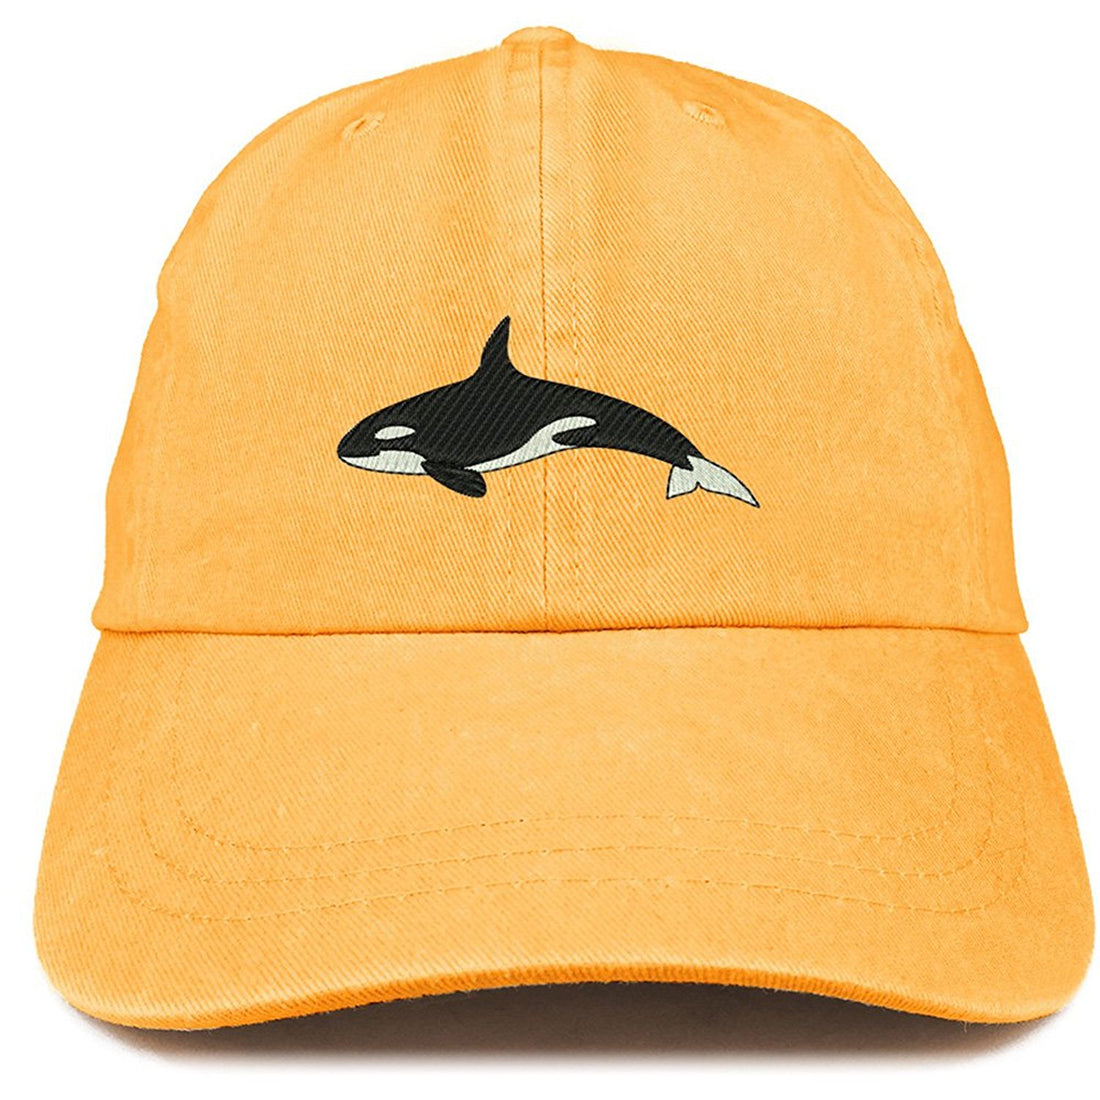 Trendy Apparel Shop Orca Killer Whale Embroidered Pigment Dyed 100% Cotton Cap